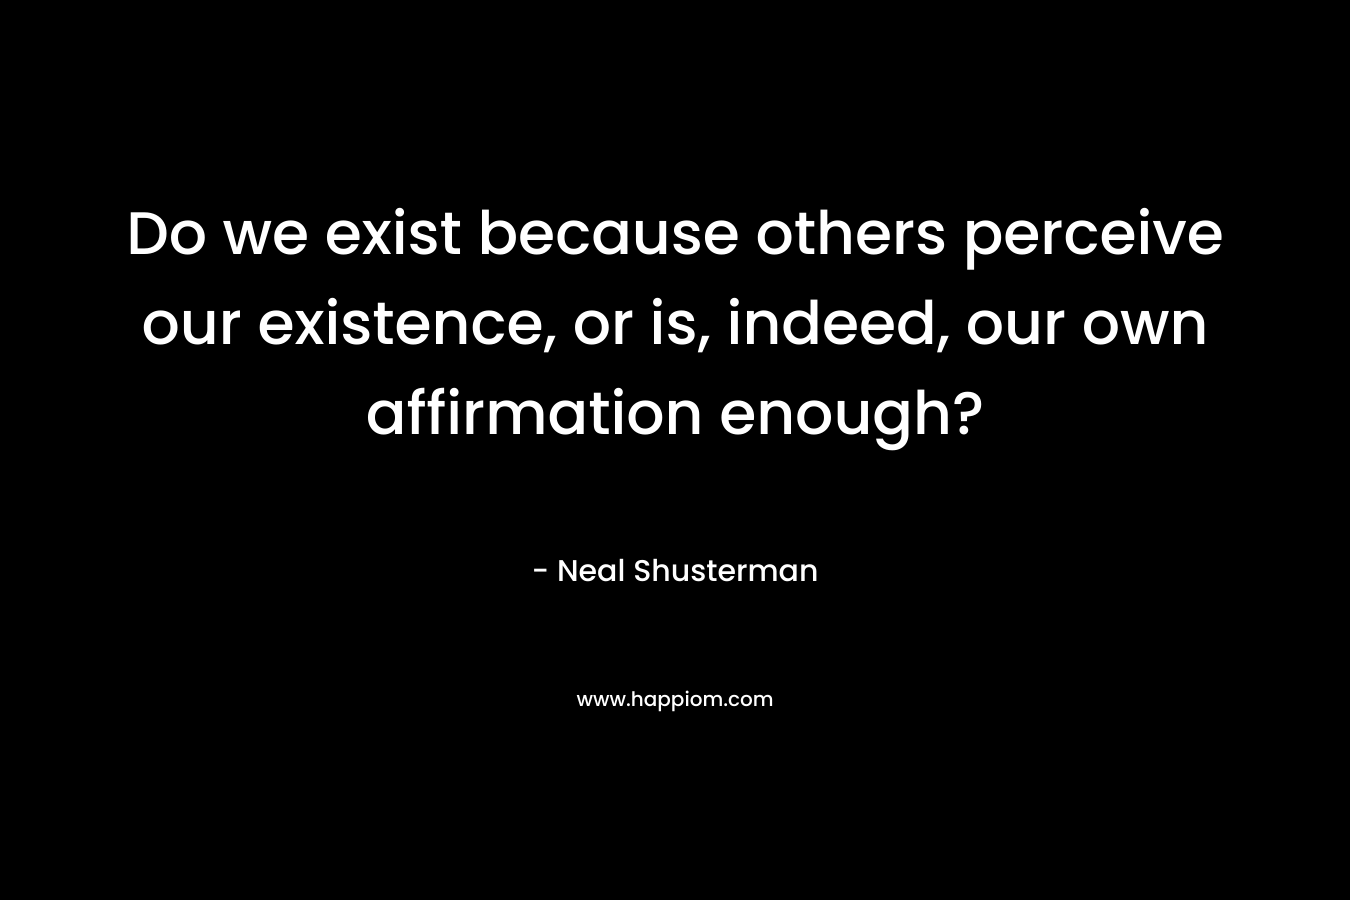 Do we exist because others perceive our existence, or is, indeed, our own affirmation enough? – Neal Shusterman